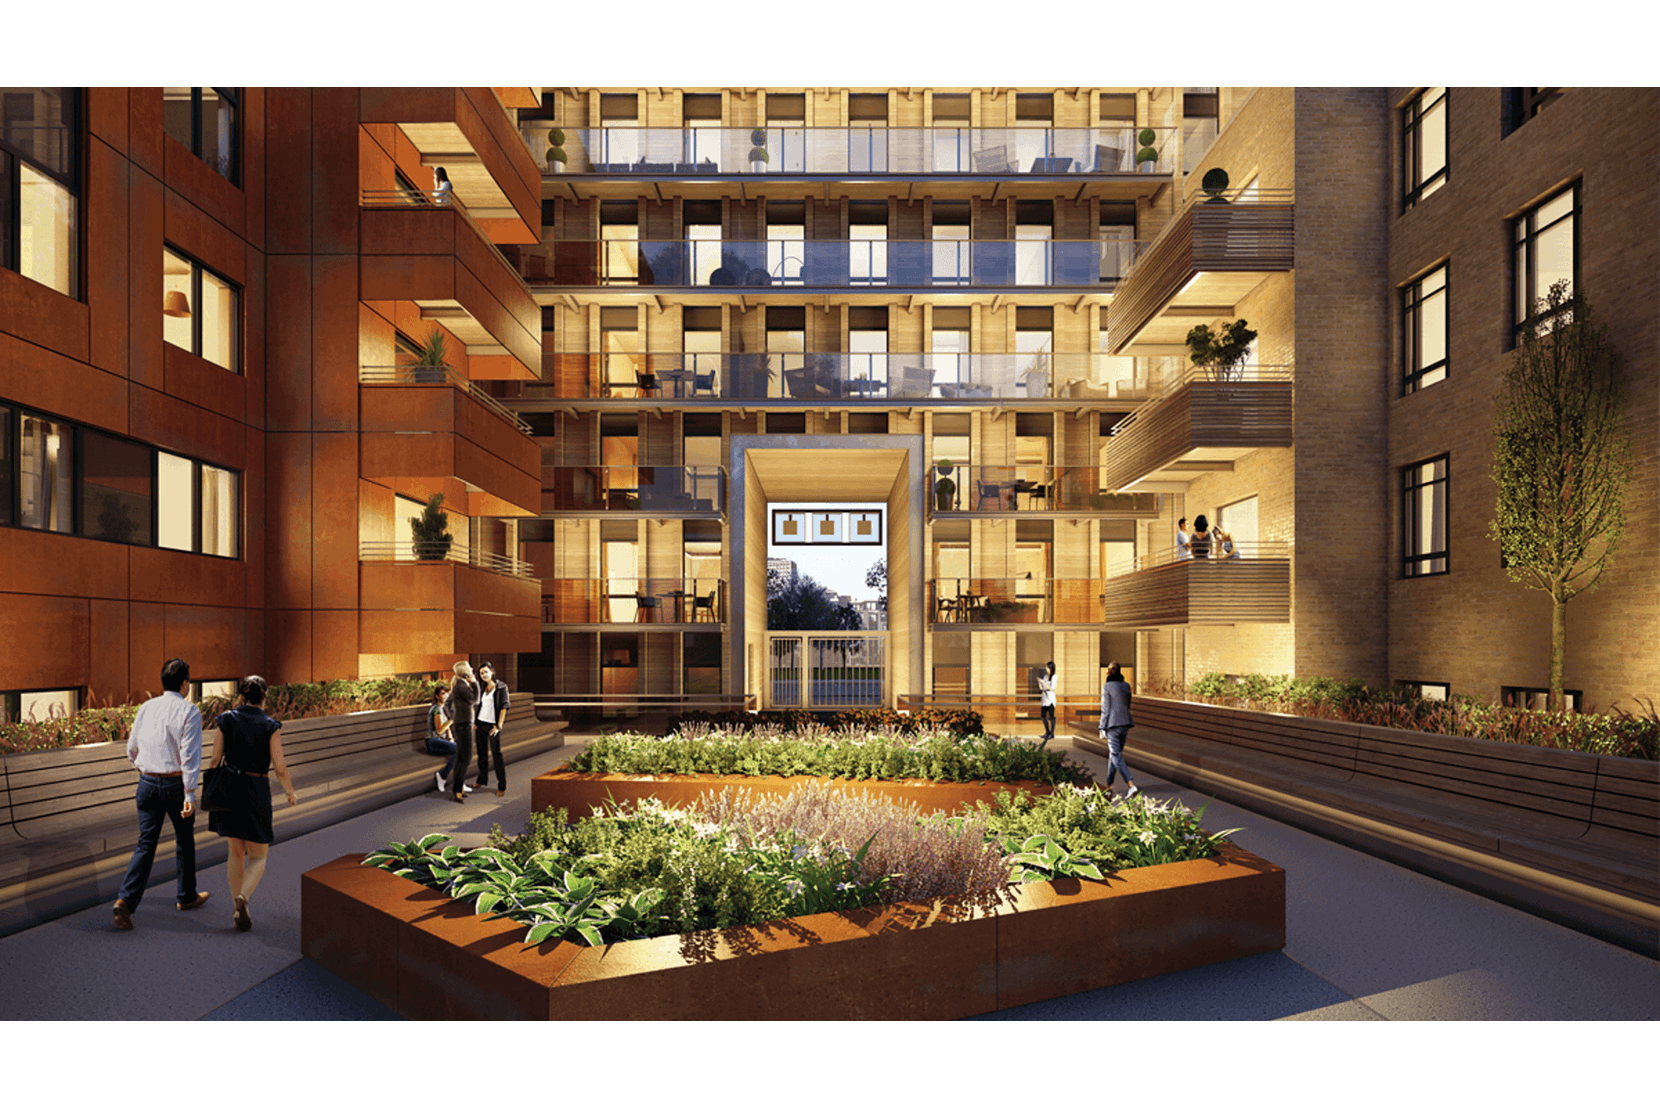 Apartments to Rent by a2dominion at City Wharf, Hackney, N1, internal courtyard CGI